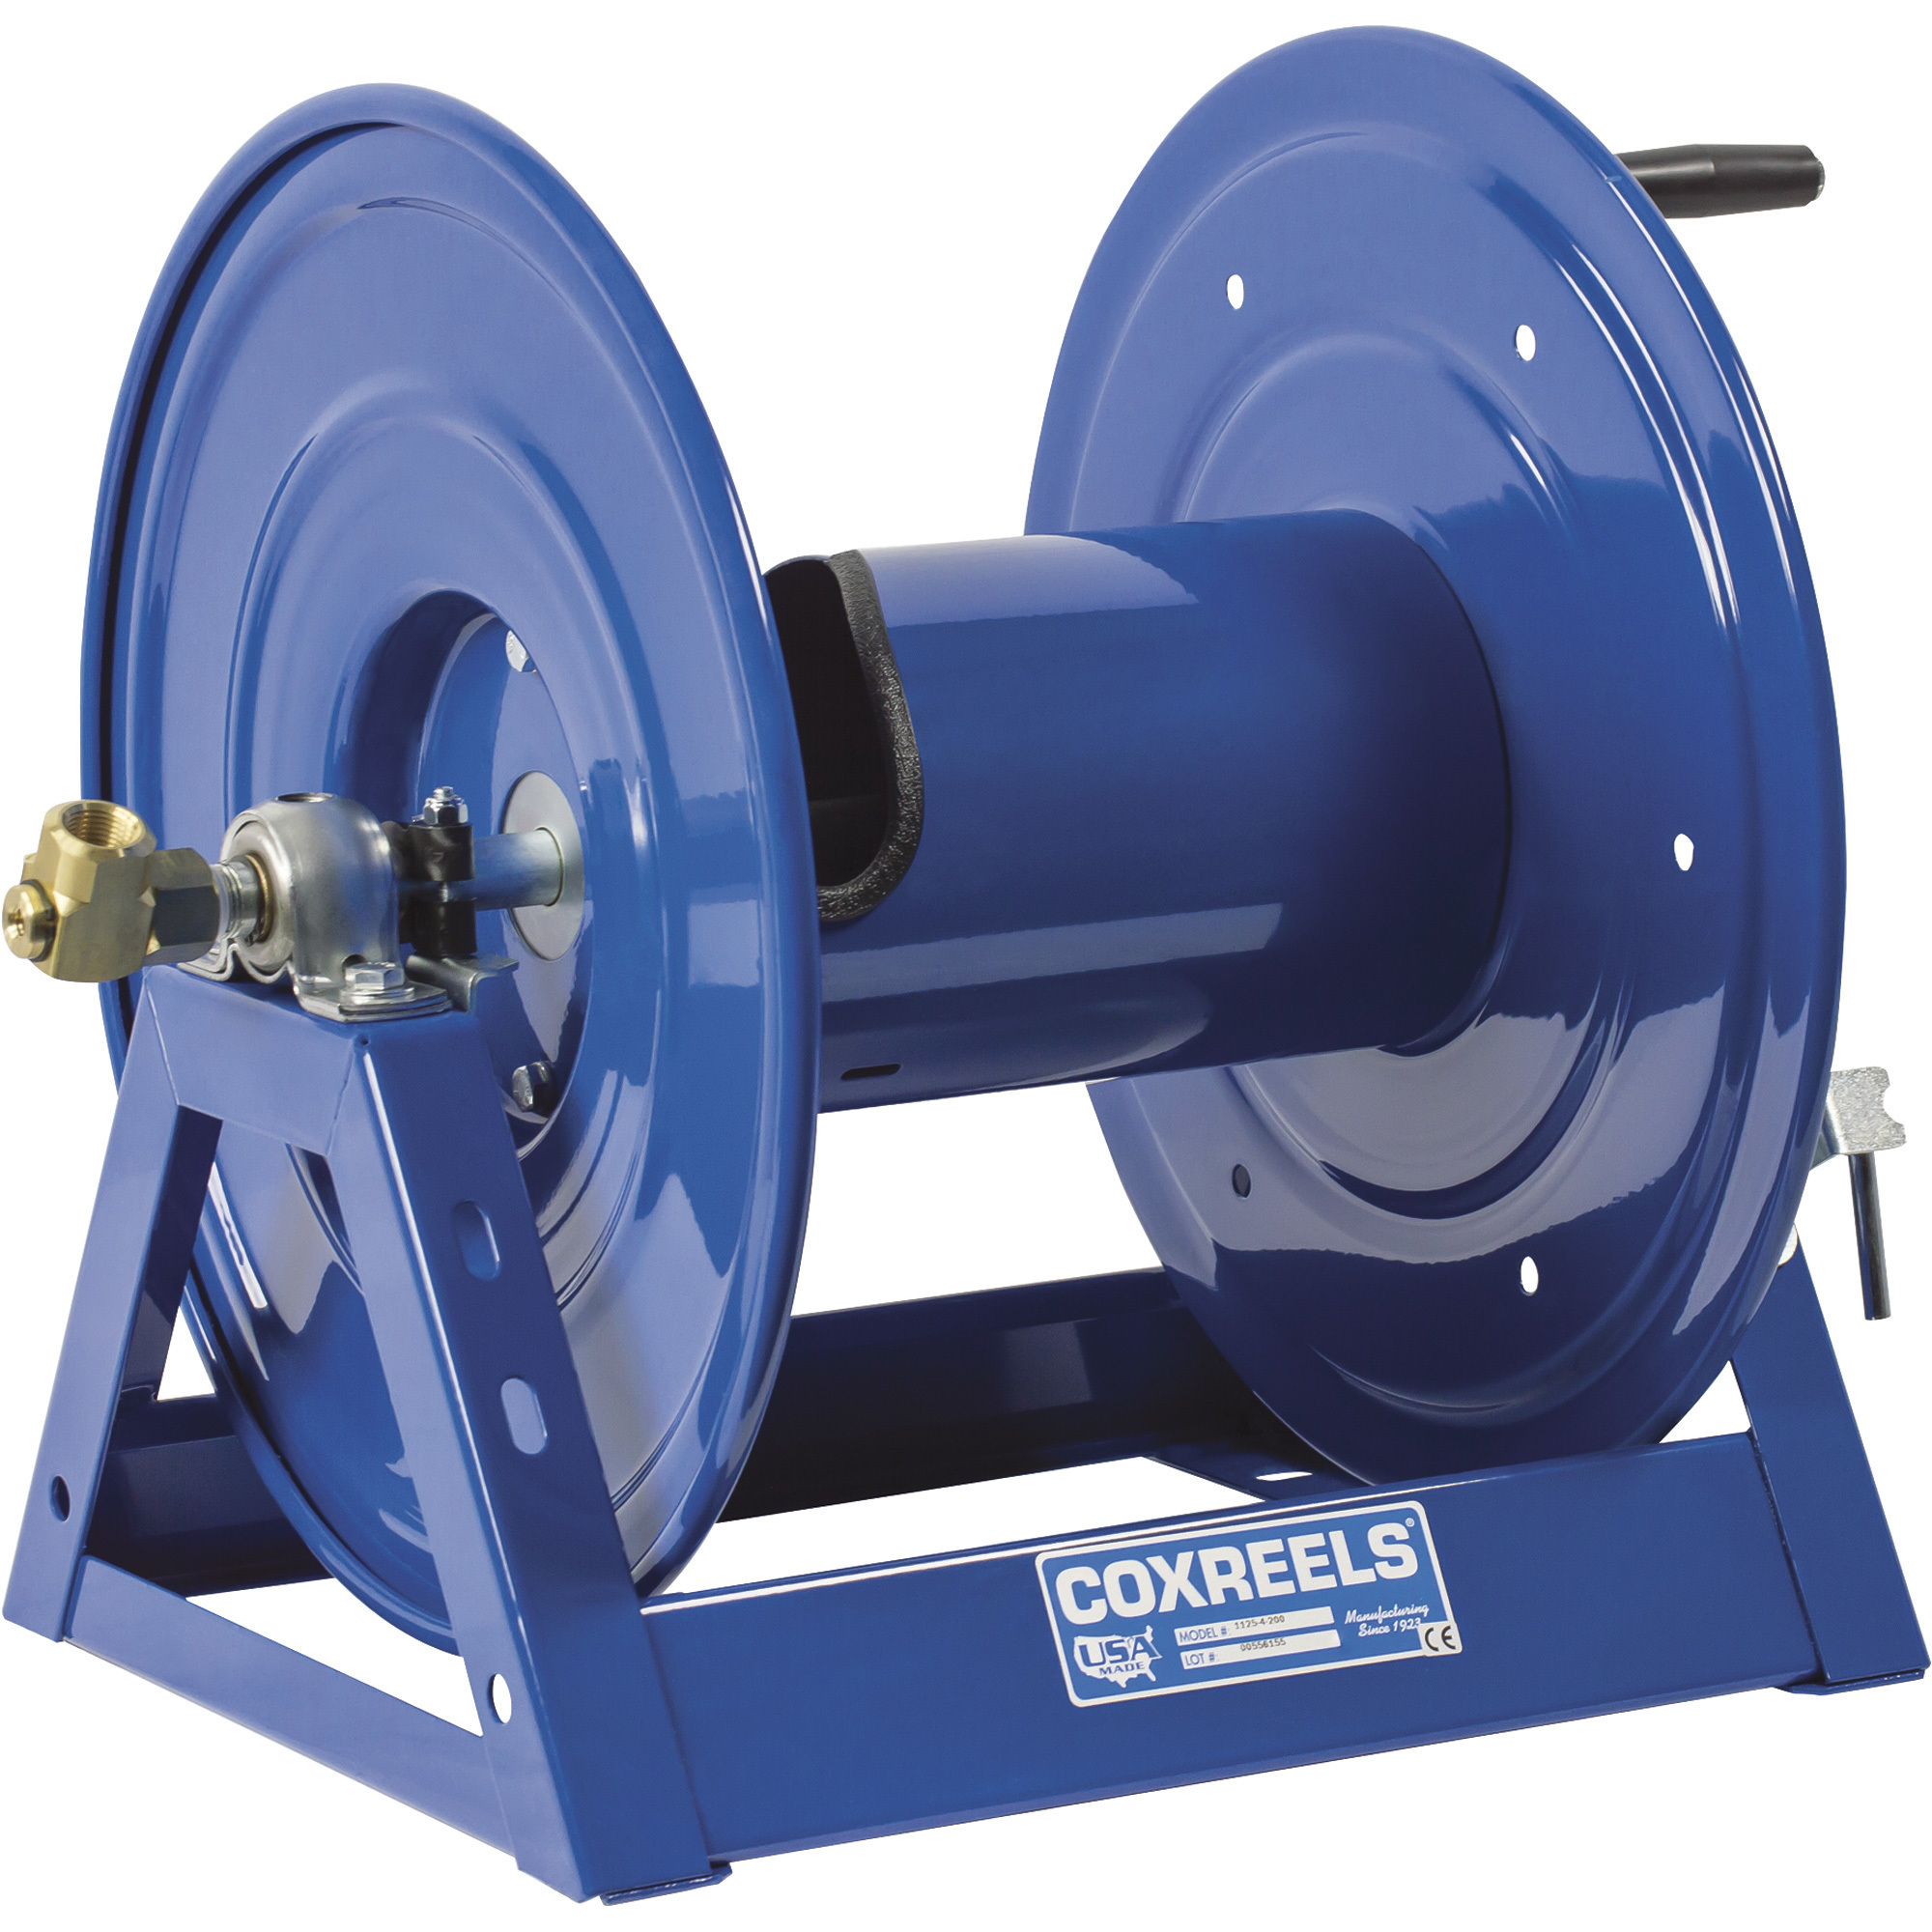 Coxreels 1125 Series Hand-Crank Hose Reel, Holds 3/4in. x 250ft